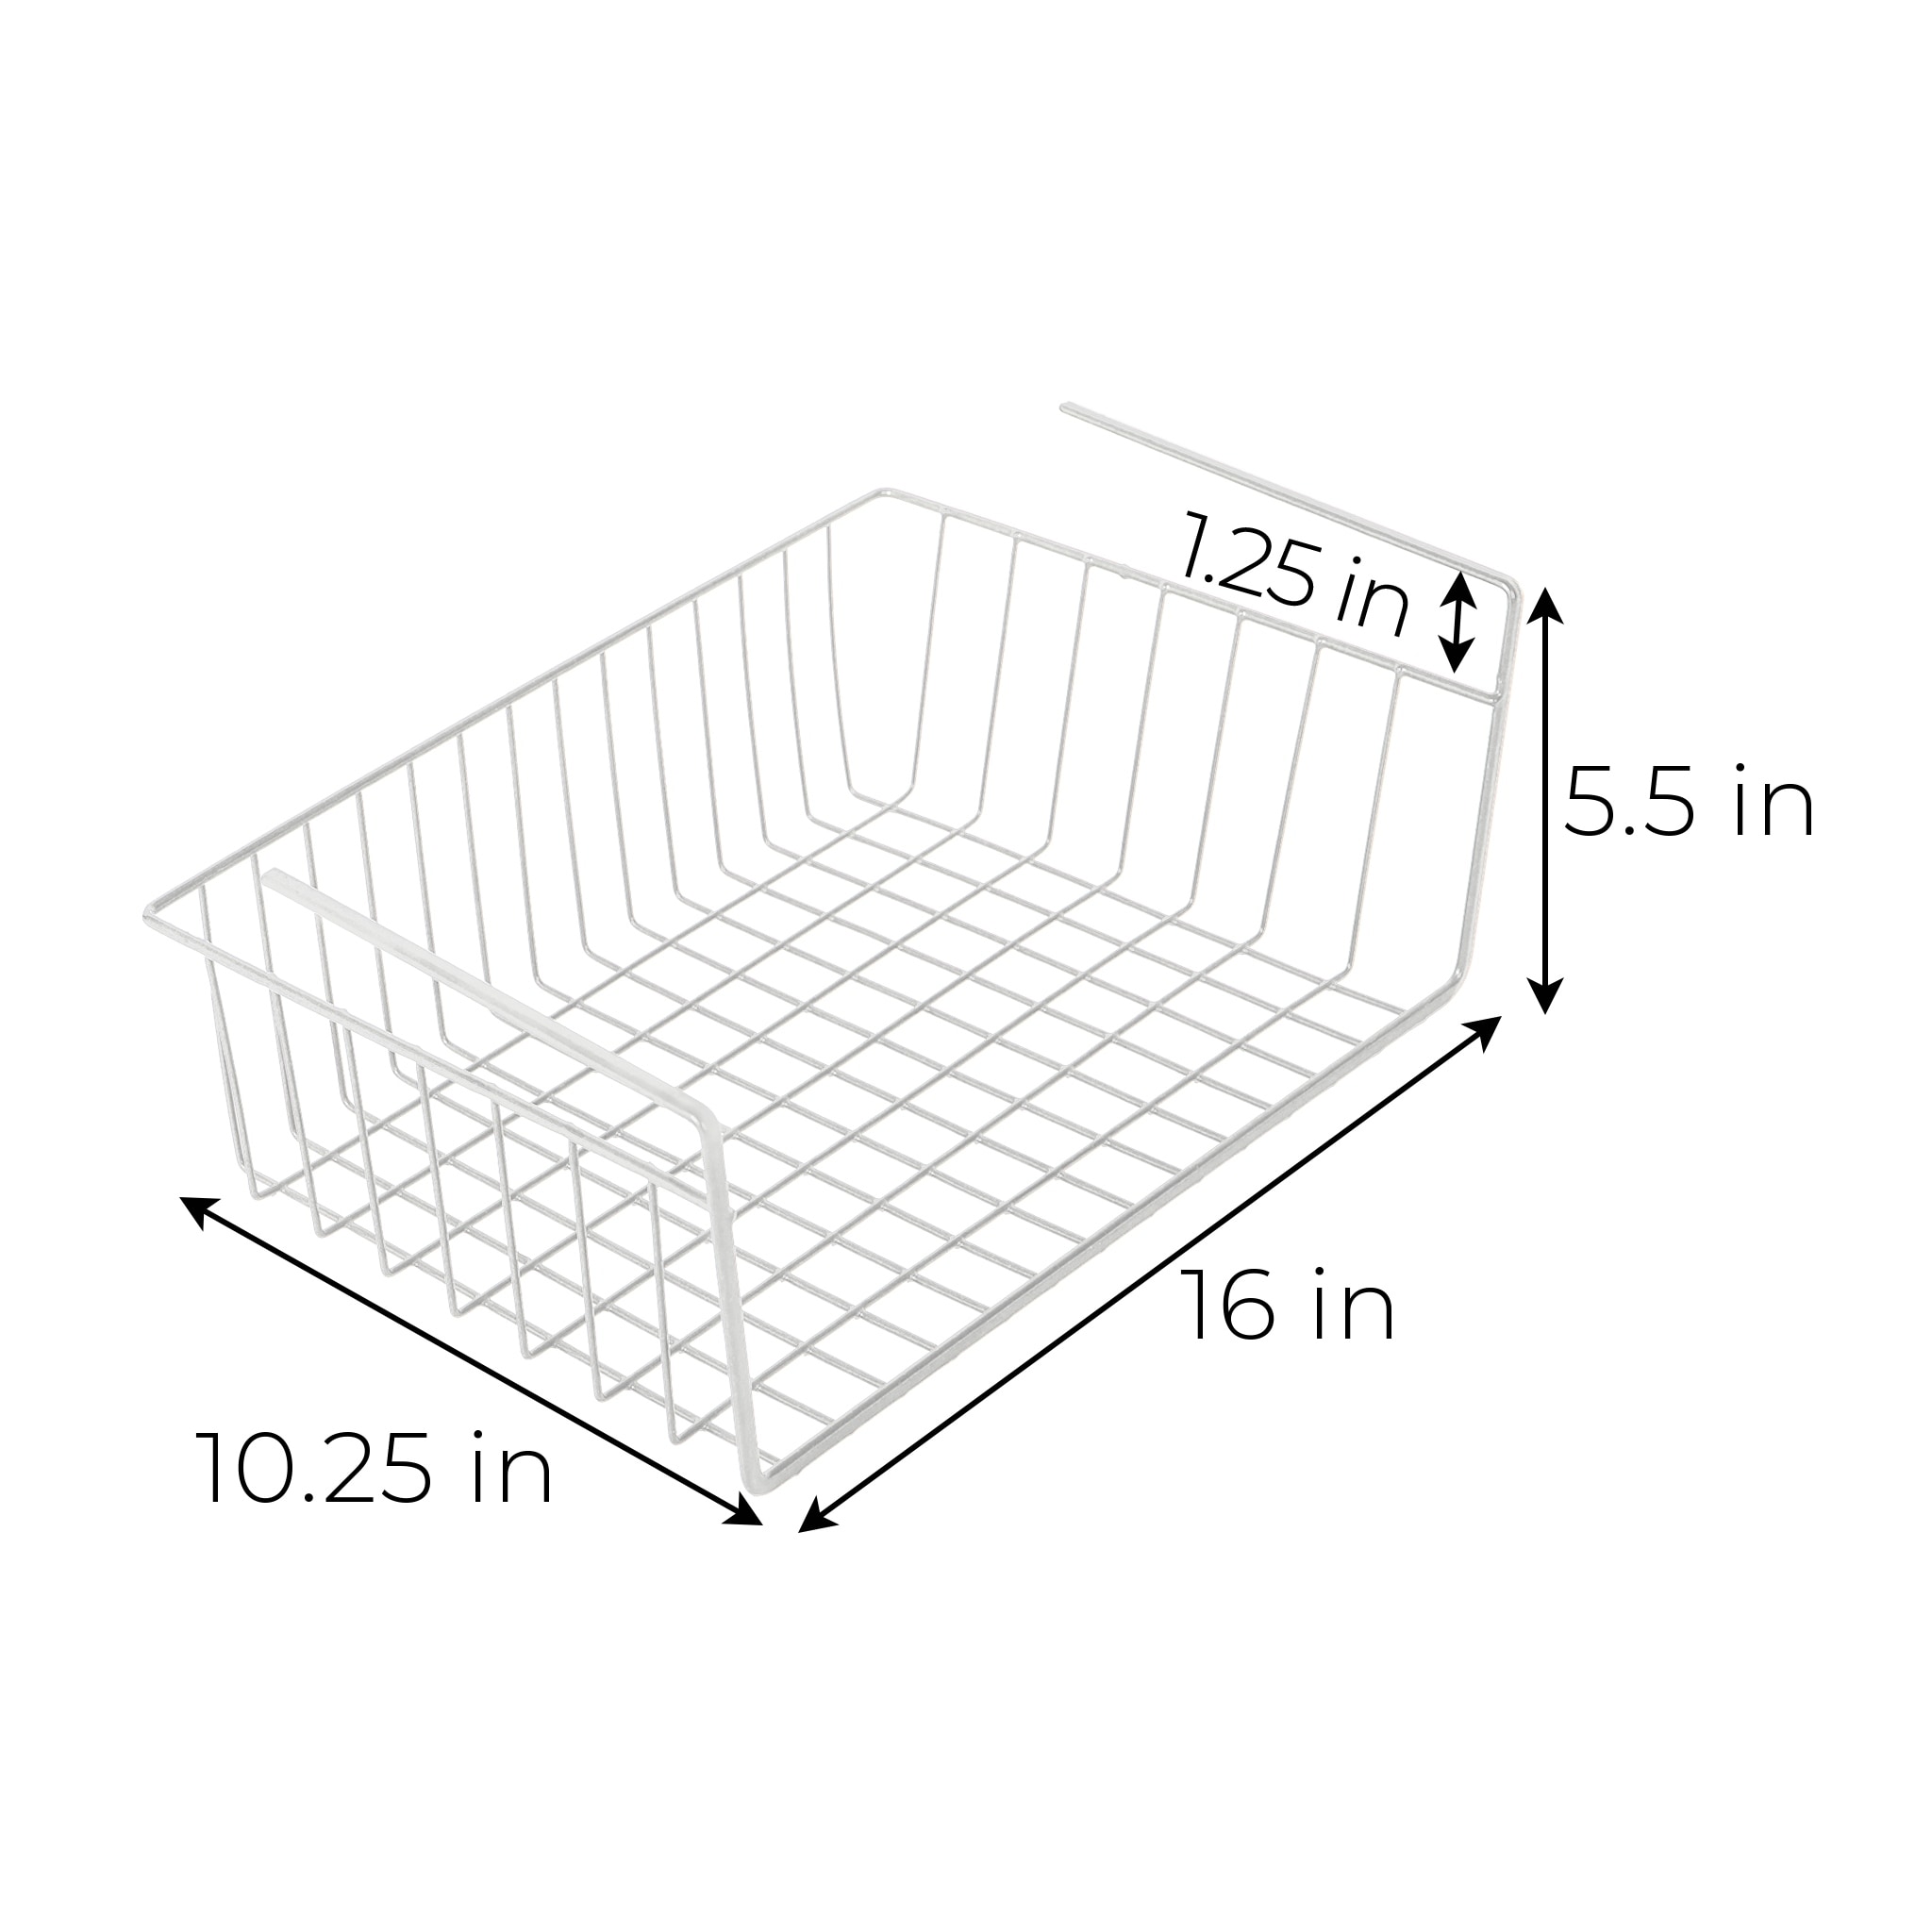 https://ak1.ostkcdn.com/images/products/is/images/direct/29b47f44148de266d98c2b2f038a0f08d5e66140/Smart-Design-Undershelf-Storage-Basket---16-x-5.5-inch.jpg